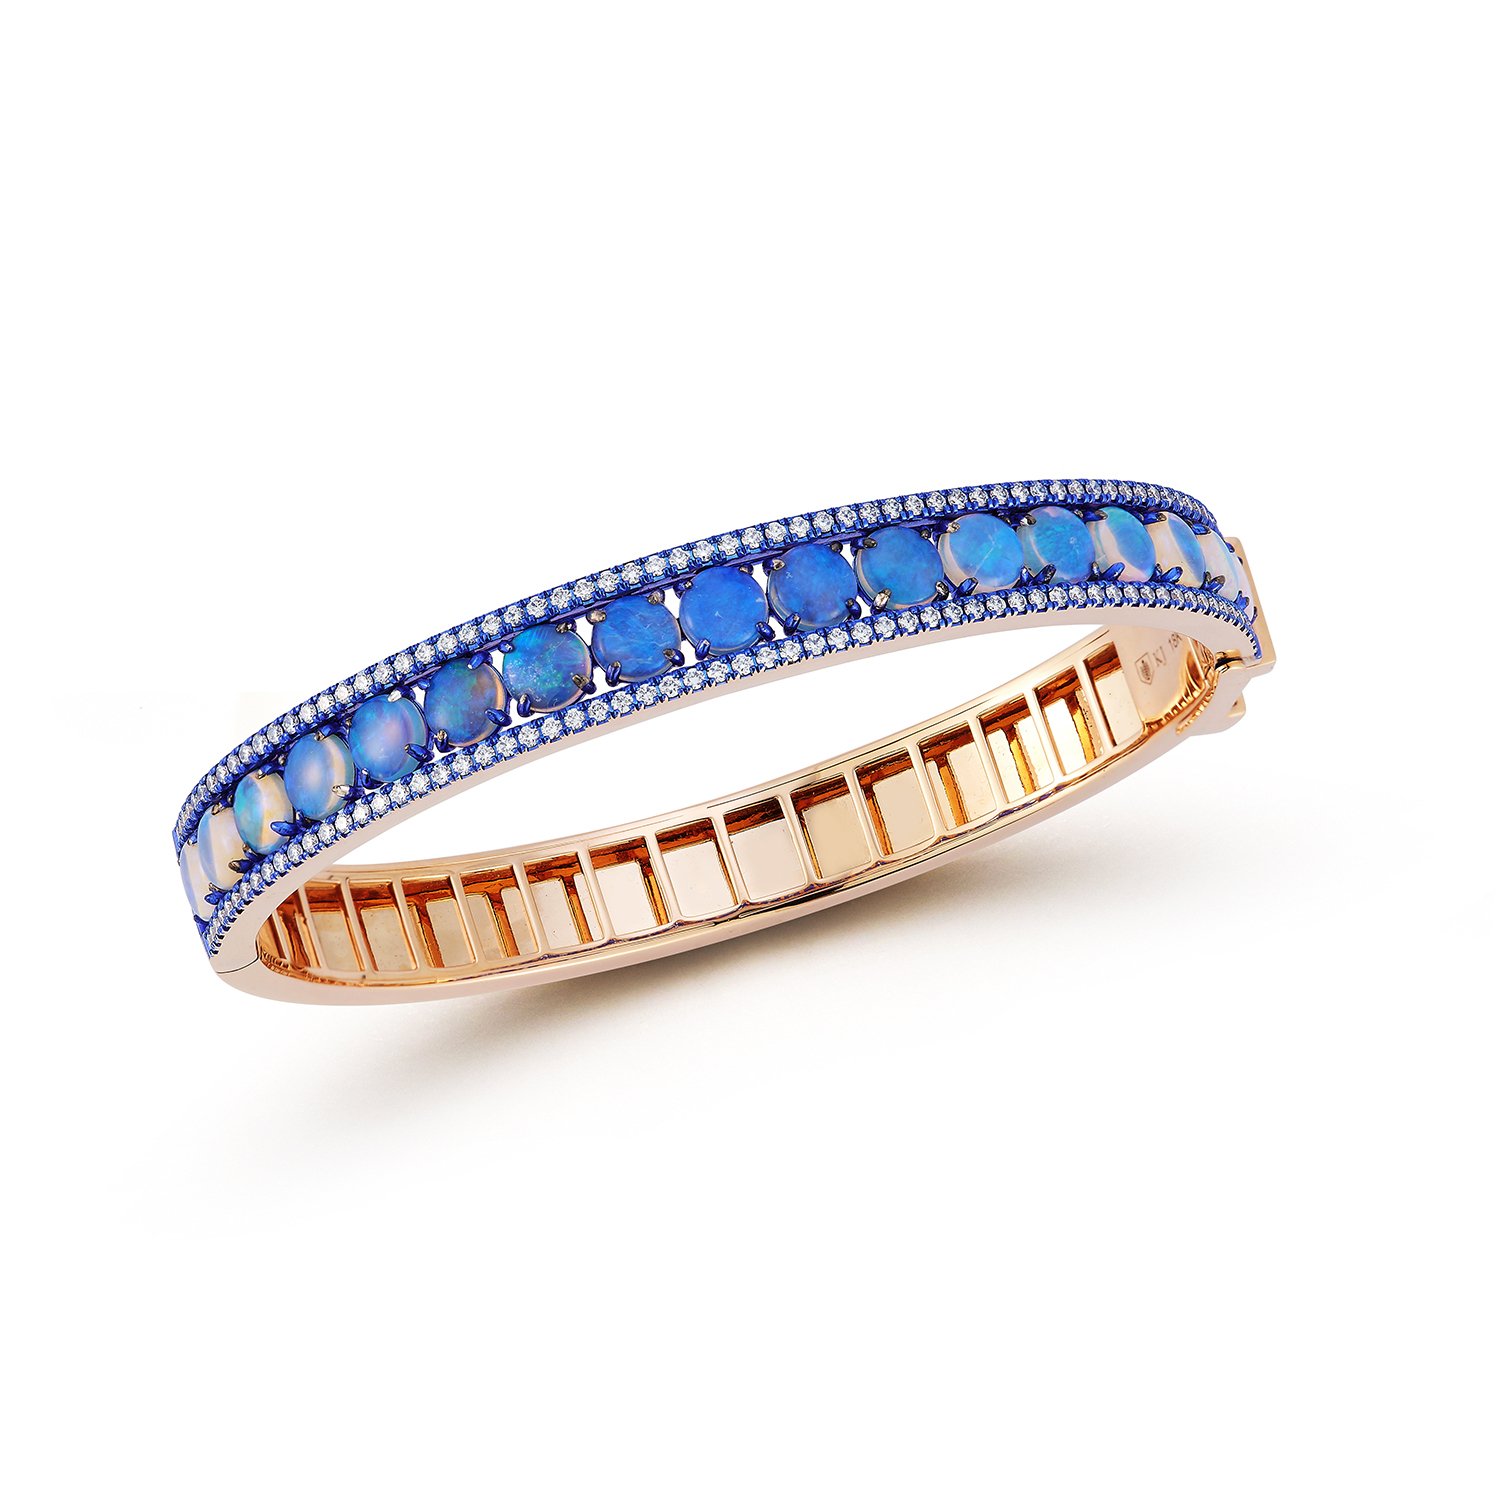 Origami Bangle Bracelet with Opals and White Diamonds in 18kt Rose Gold and Blue Rhodium